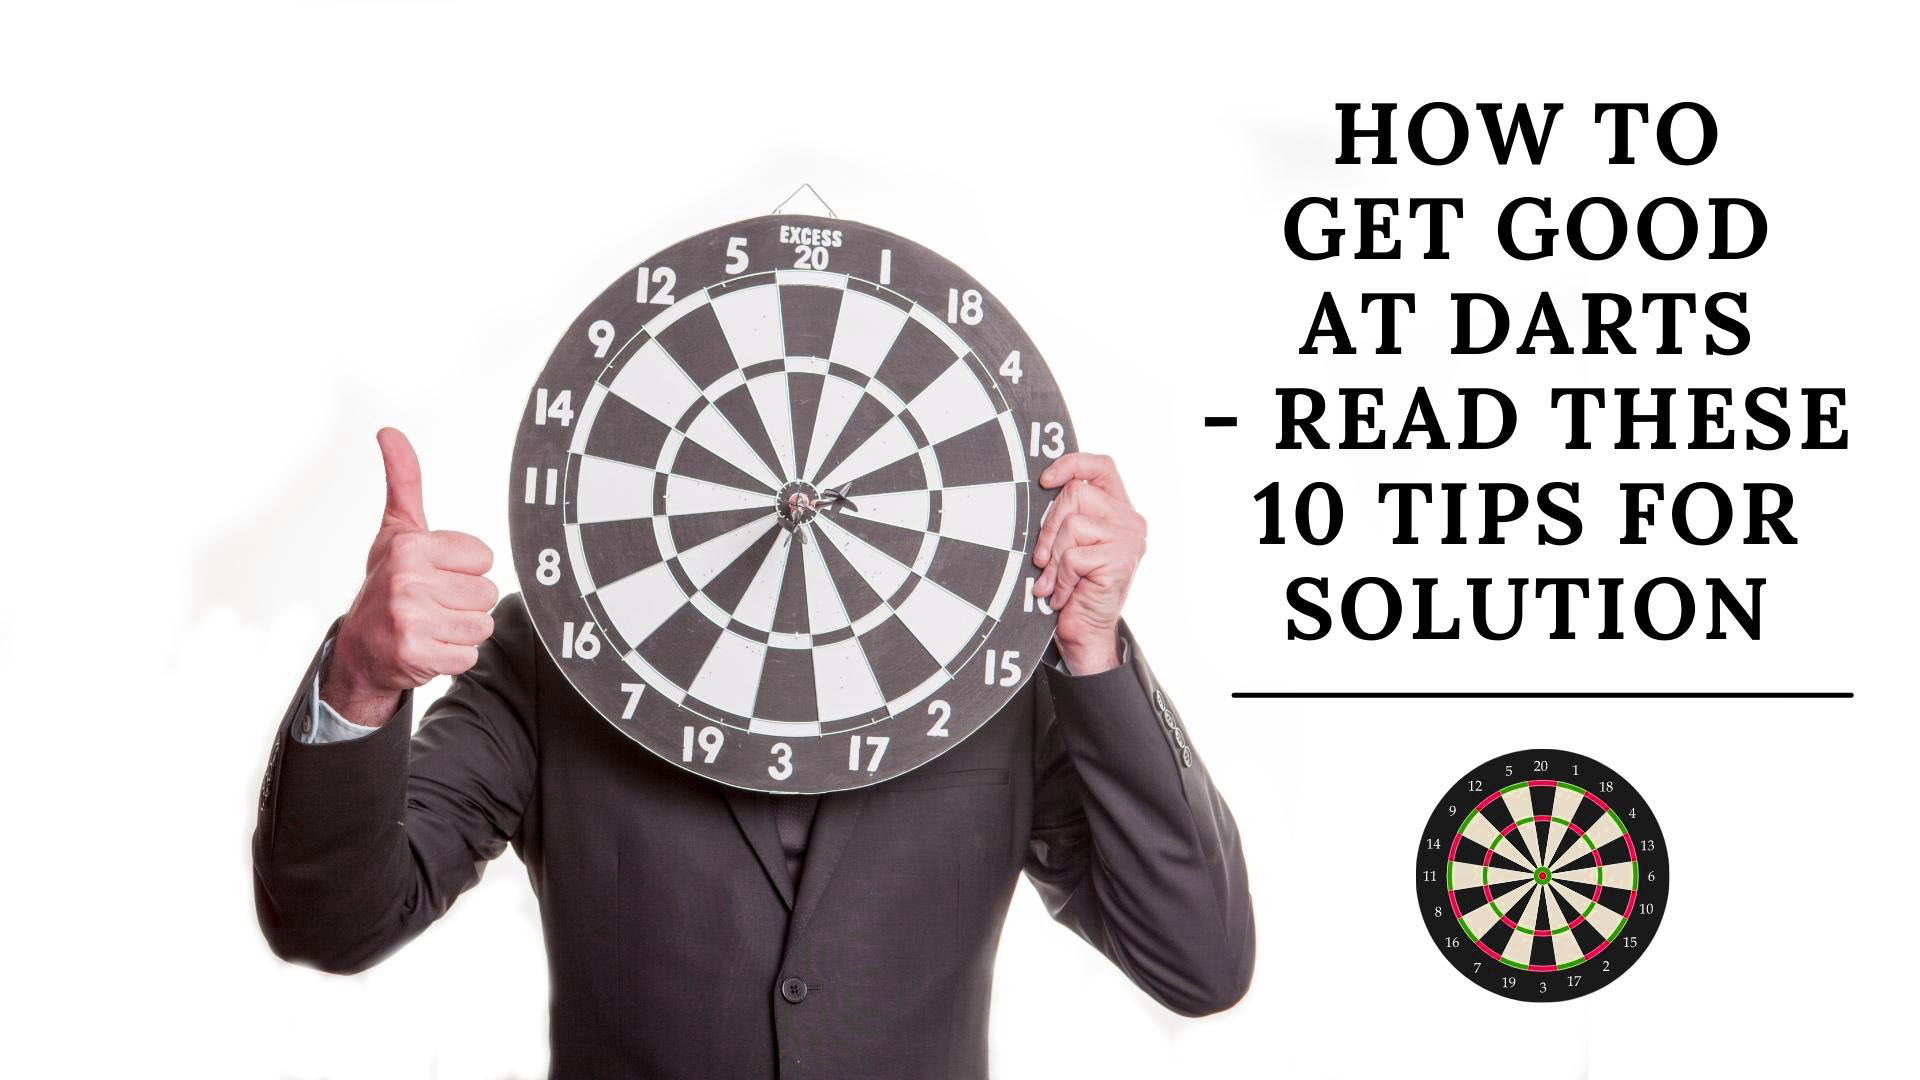 How To Get Good At Darts - Read These 10 Tips For Solution